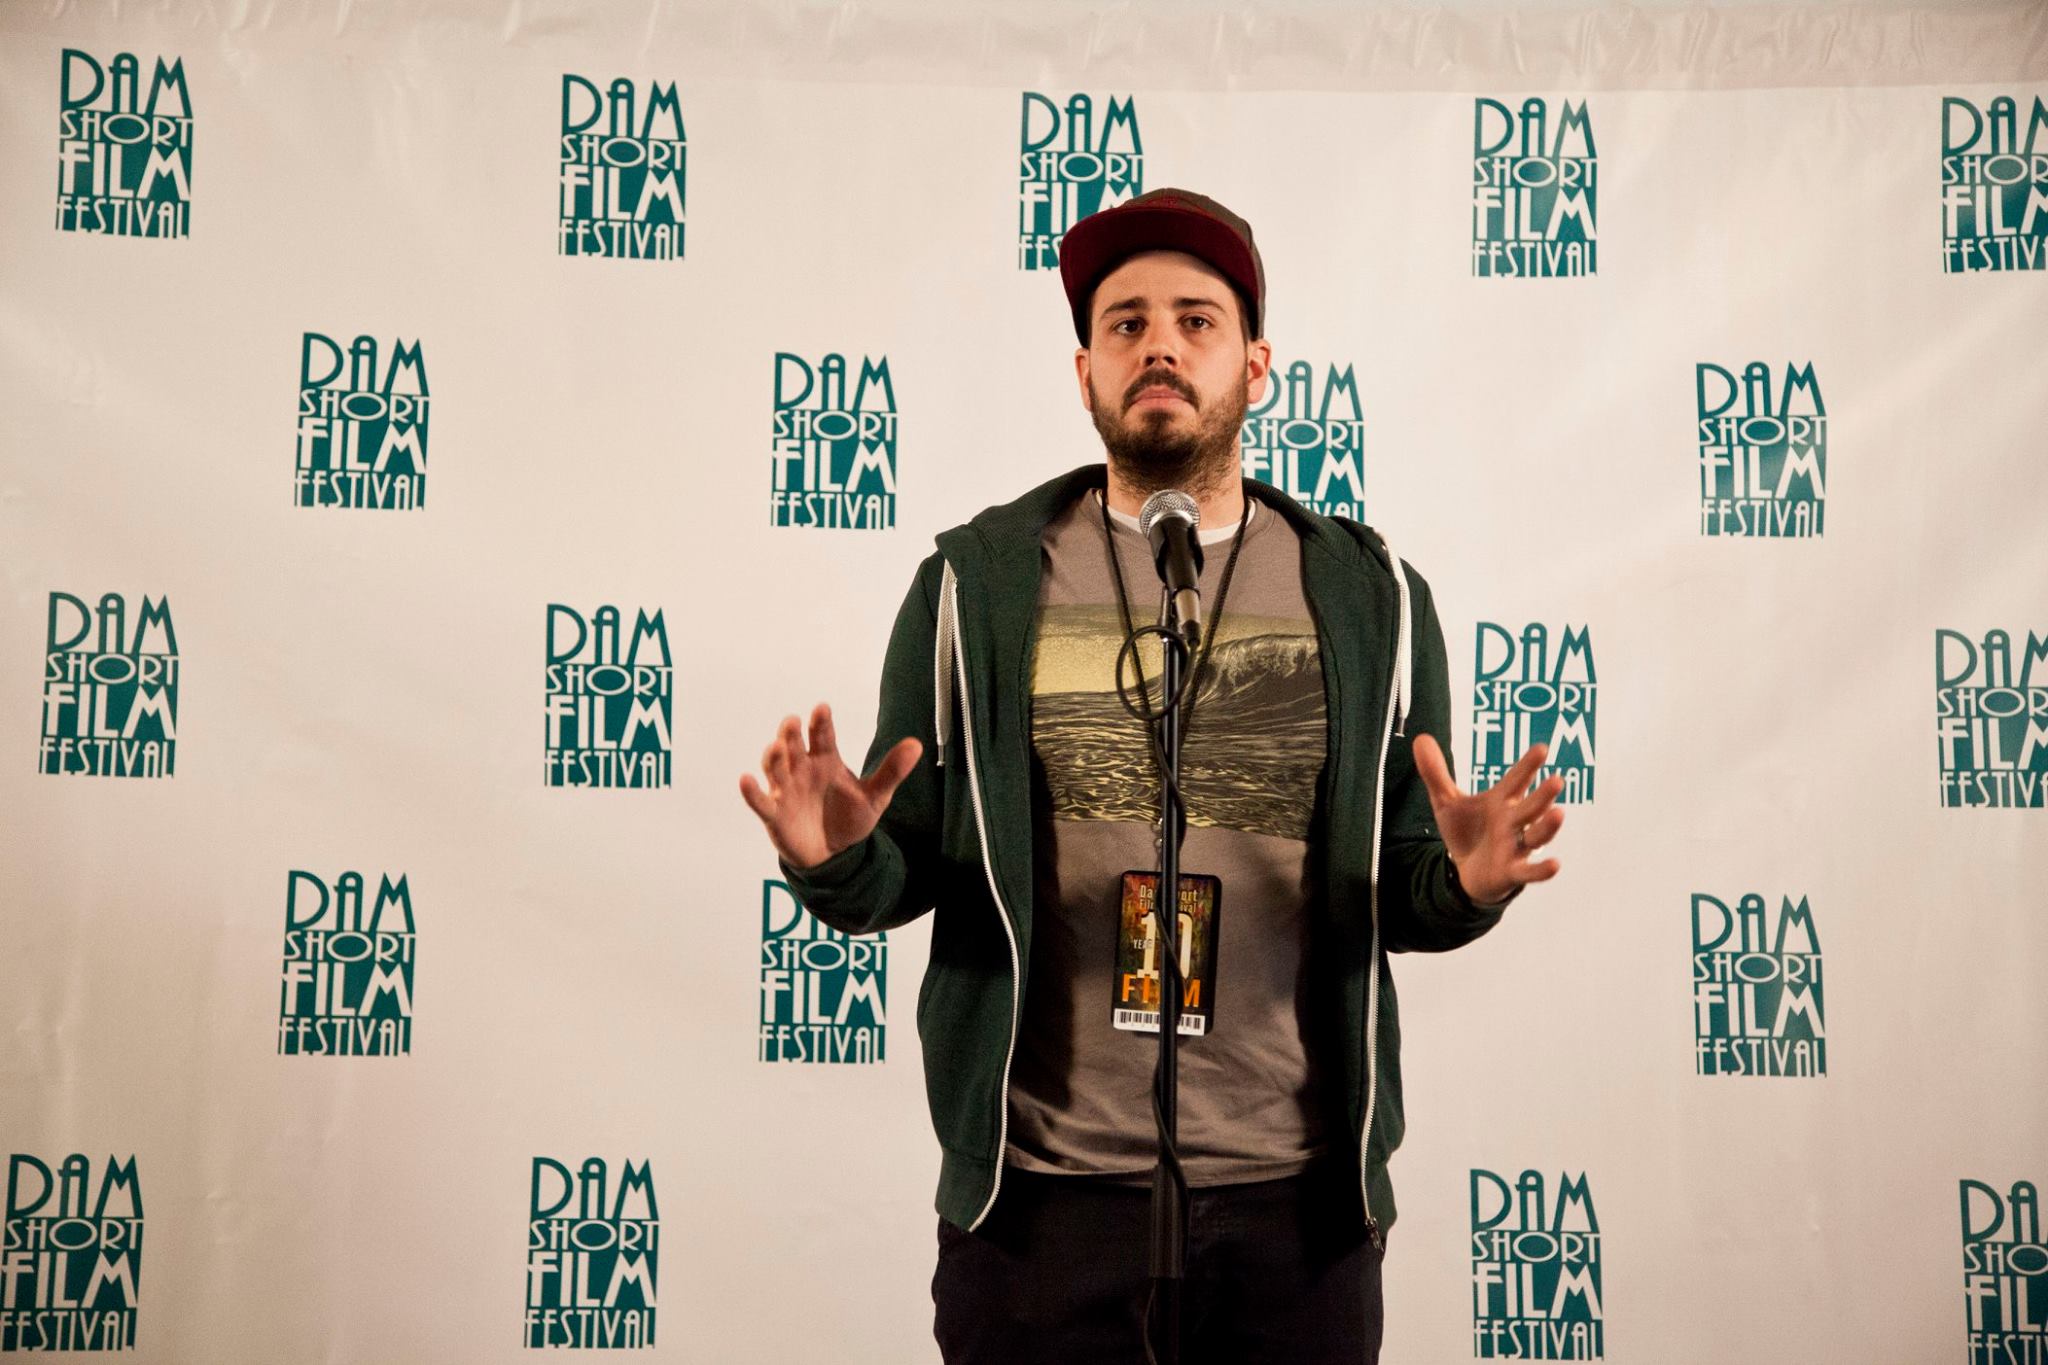 Press Conference at The Dam Short Film Festival